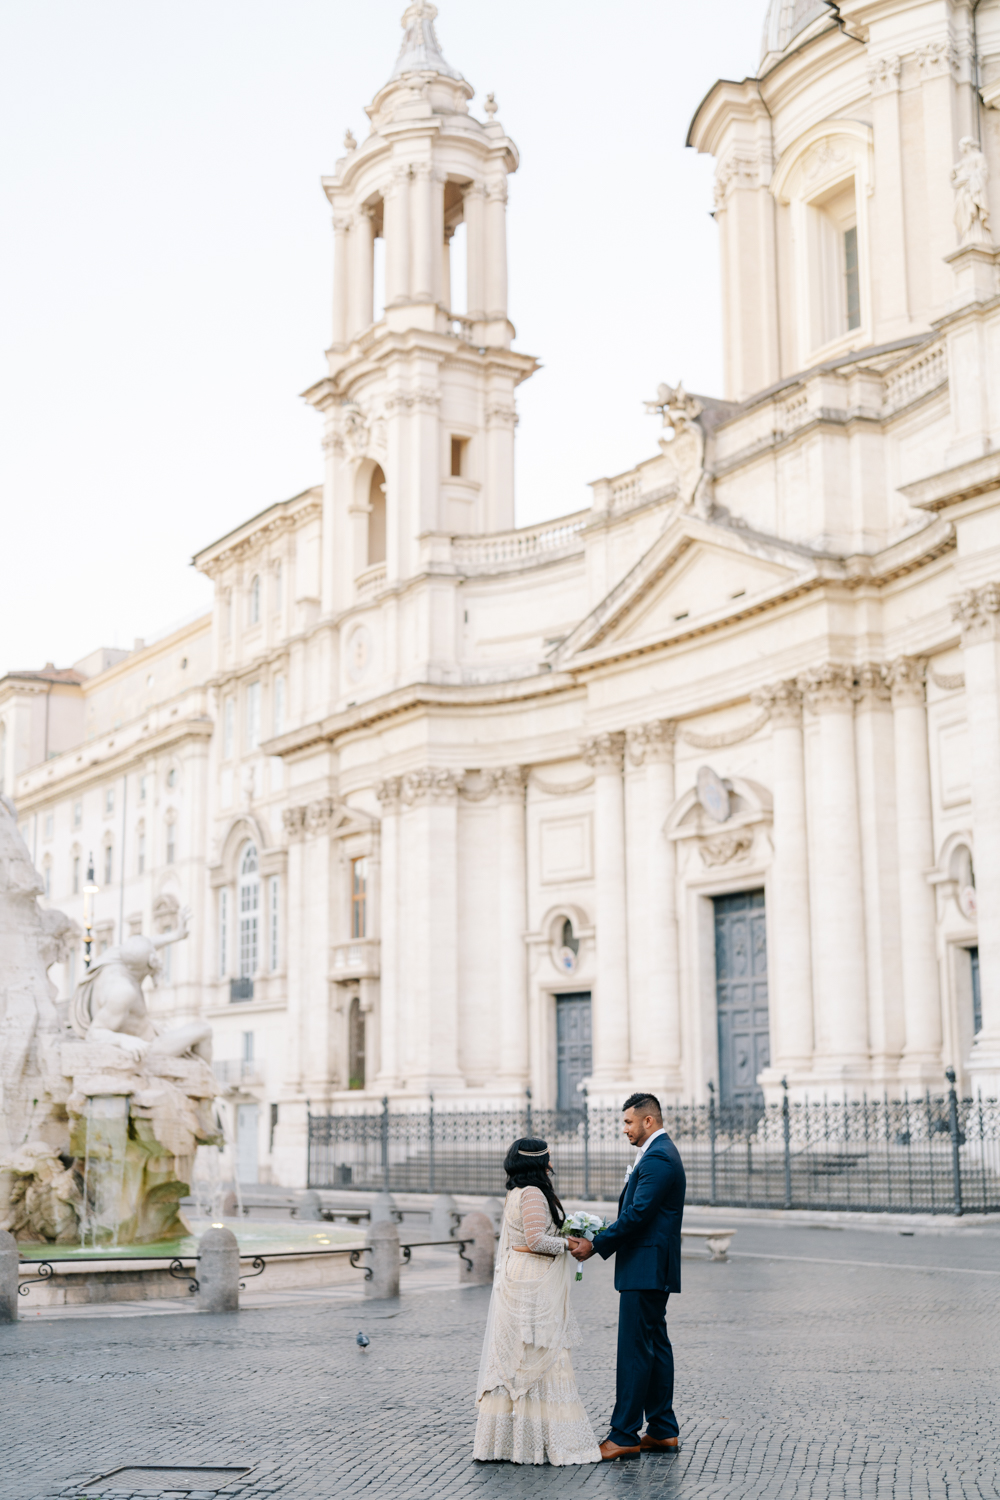 Top places for an elopement wedding photoshoot in Rome